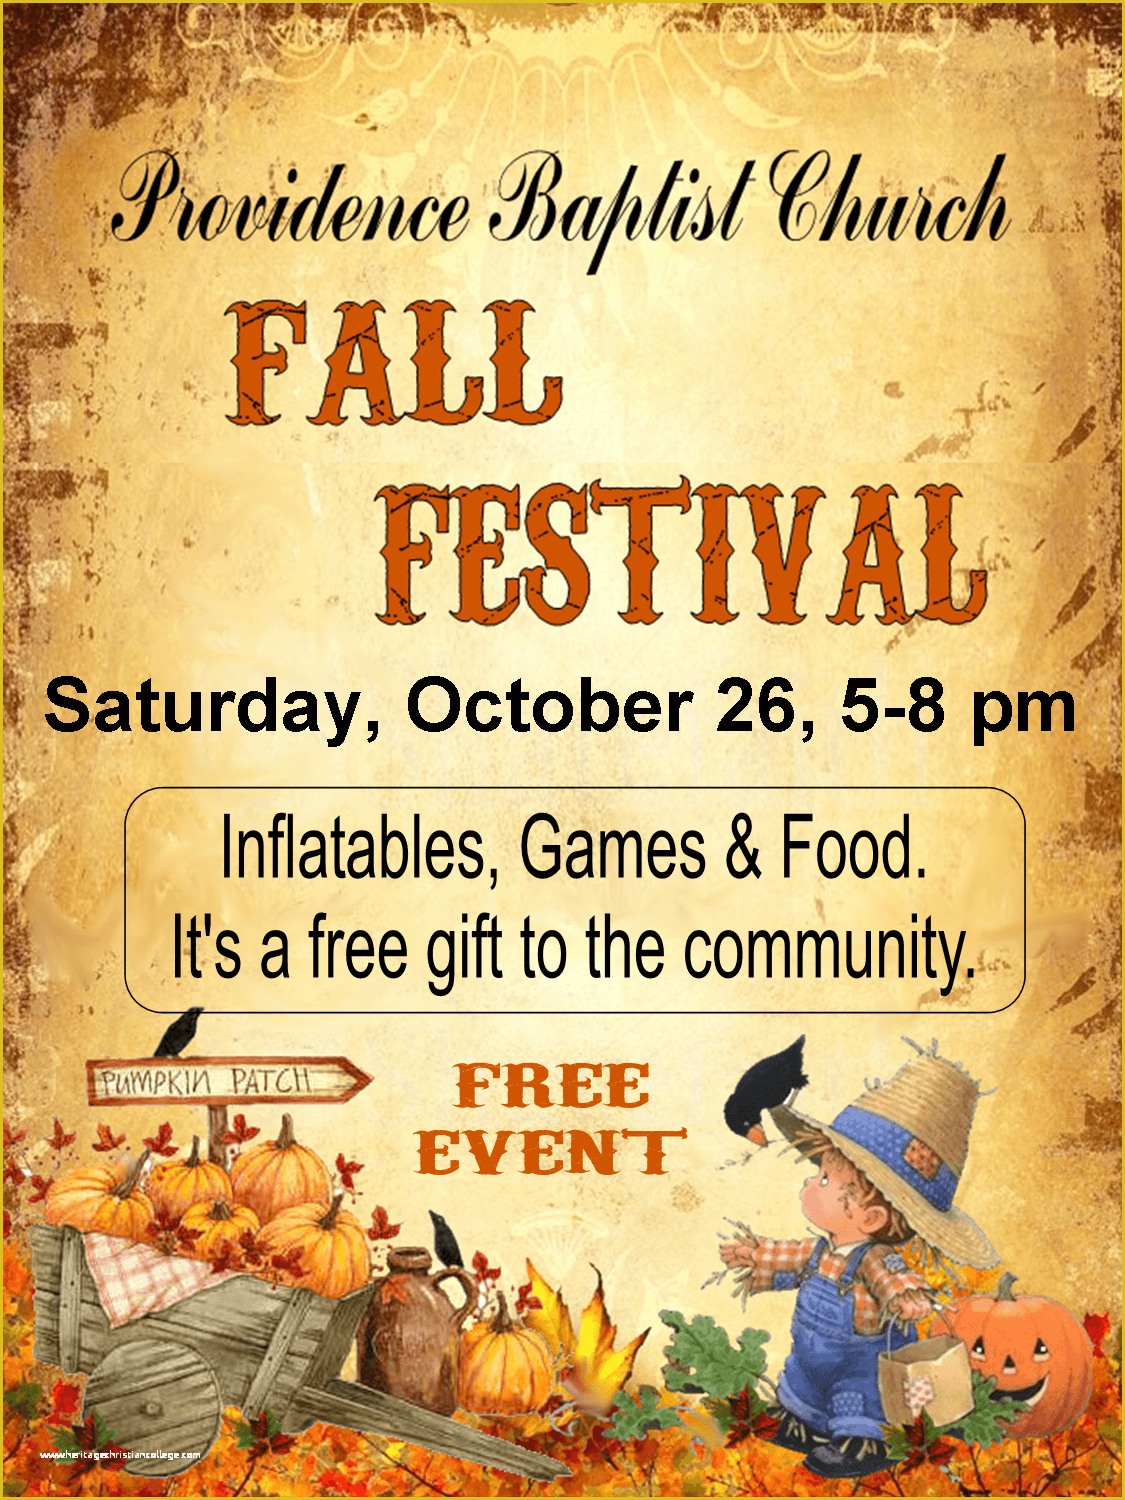 Free Printable Fall Festival Flyer Templates Of Providence Baptist Church Invites Everyone Out to their